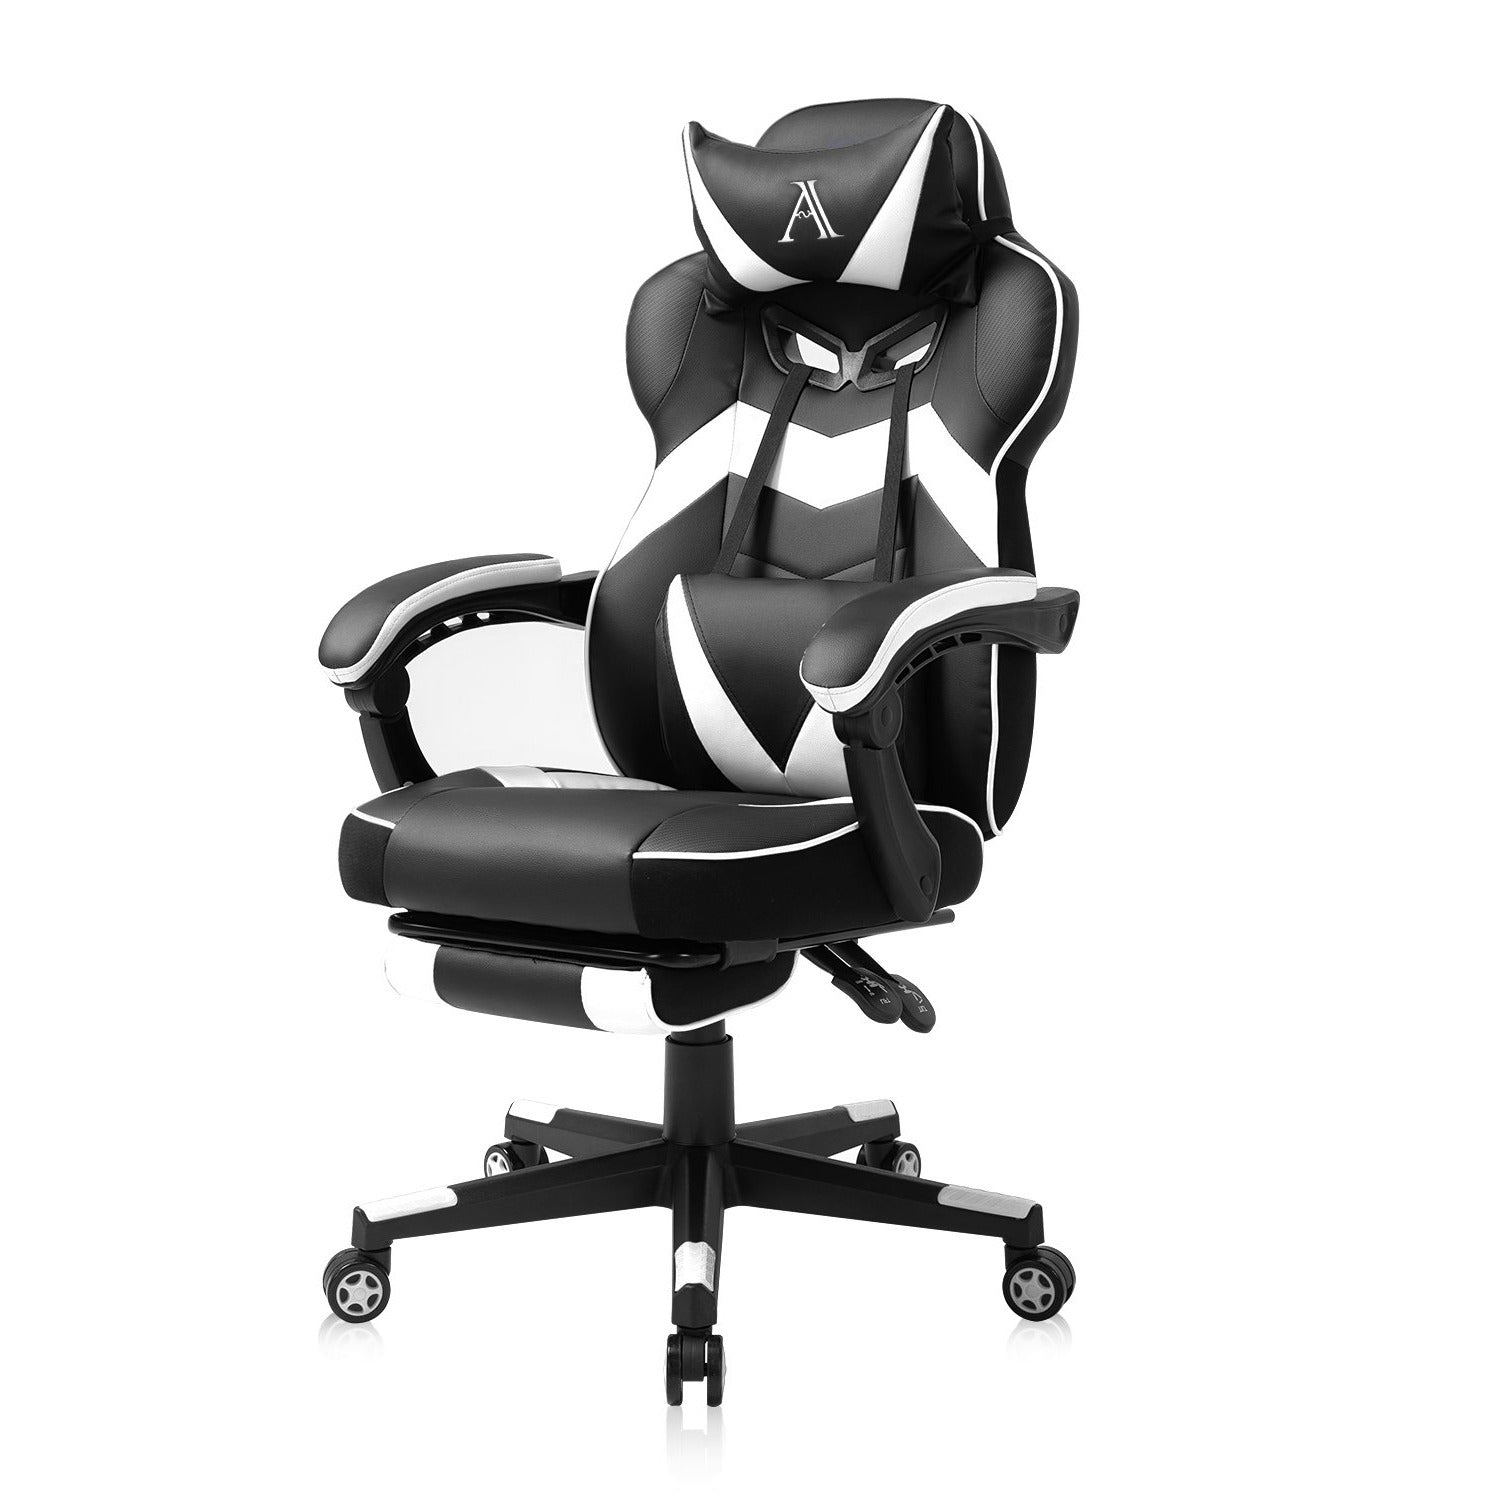 YAMASORO Racer Ergonomic PC Gaming Chair Adjuastable Leather Reclining Office Chair With Footrest (8264)